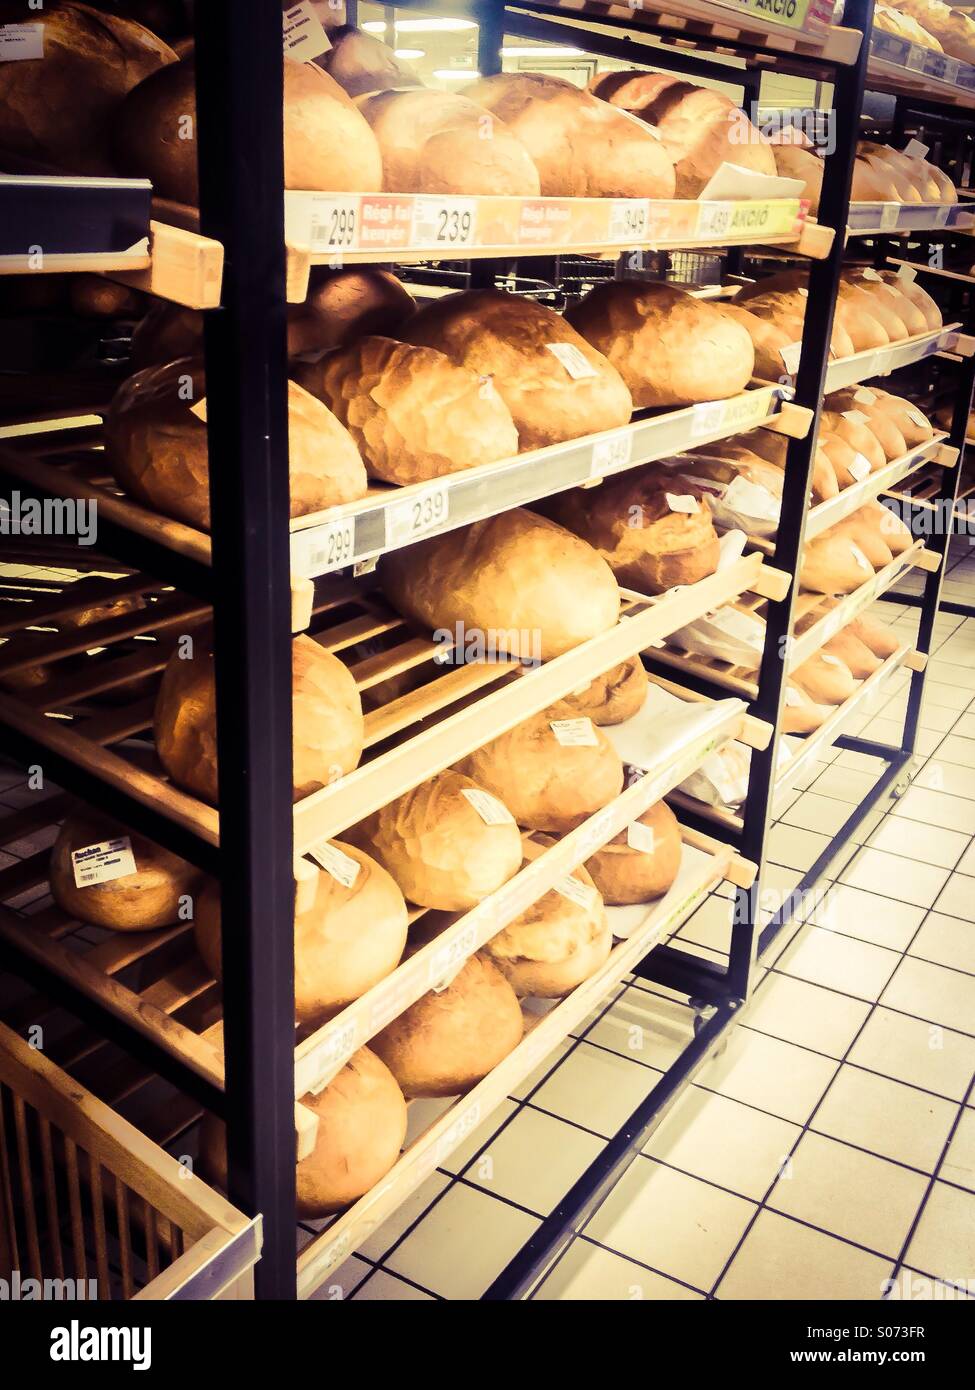 https://c8.alamy.com/comp/S073FR/loaves-of-freshly-baked-bread-lined-up-at-the-bakery-ready-for-the-S073FR.jpg